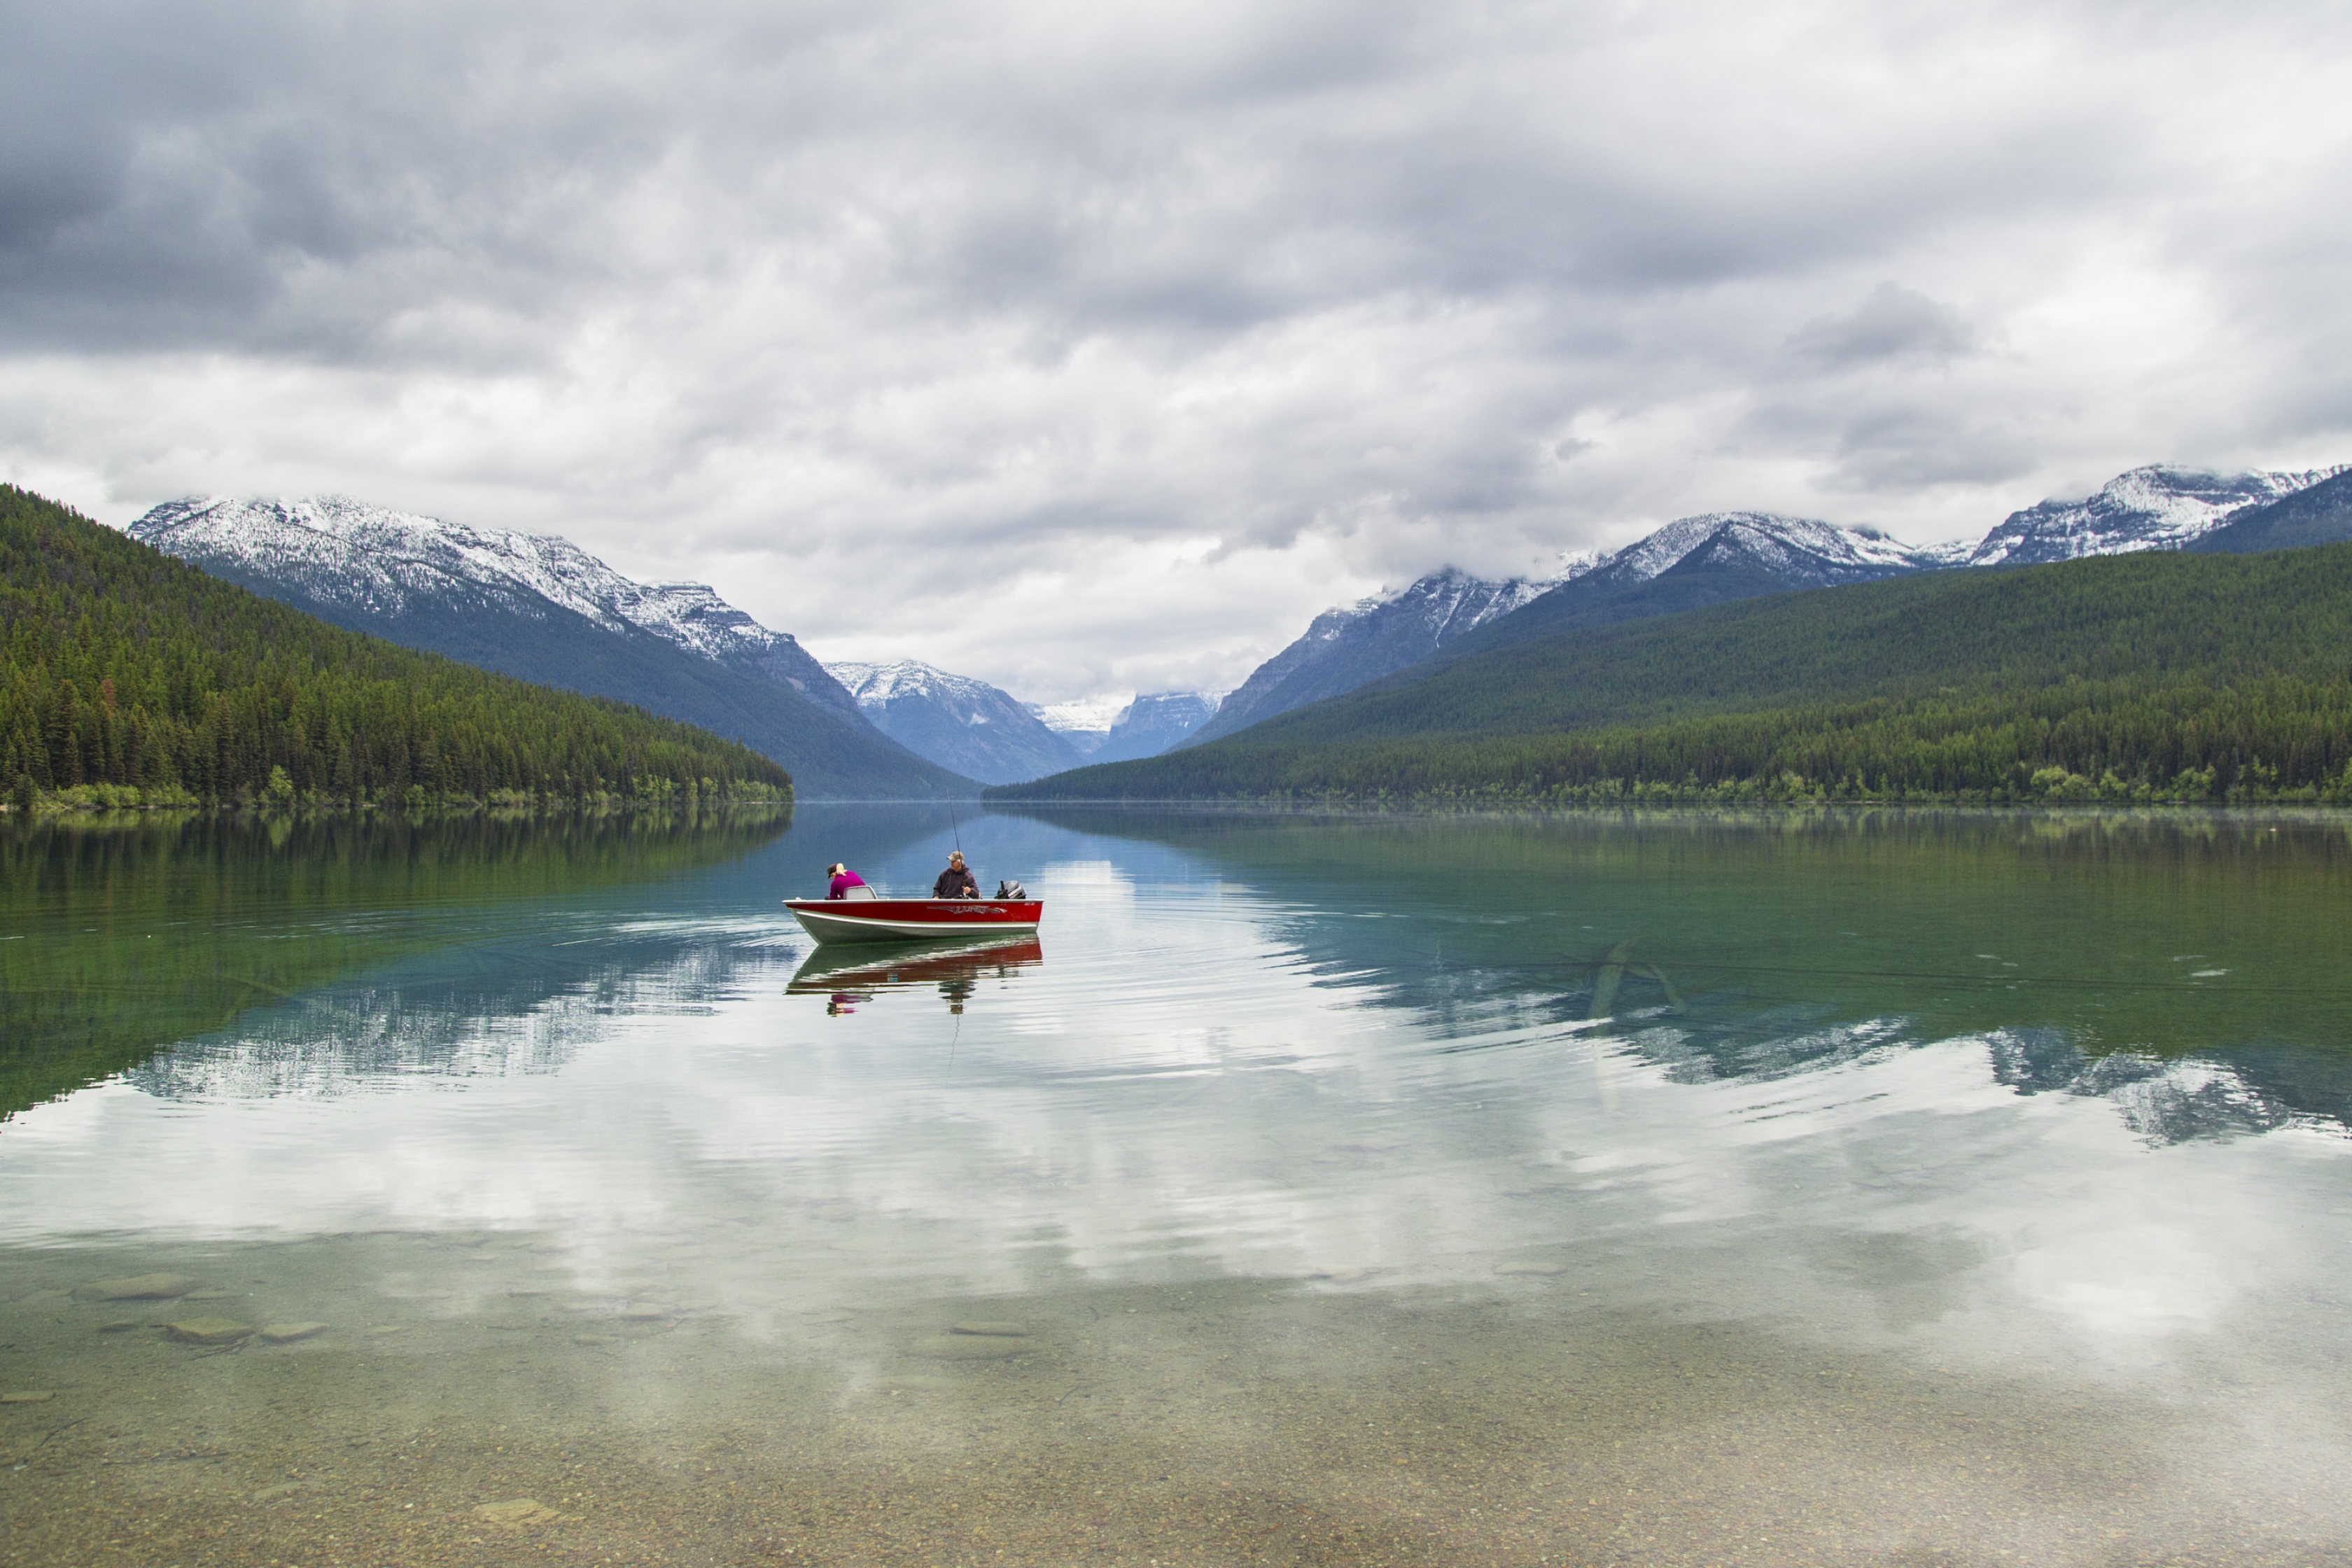 Boaters in a red boat on Bowman Lake at Glacier National Park